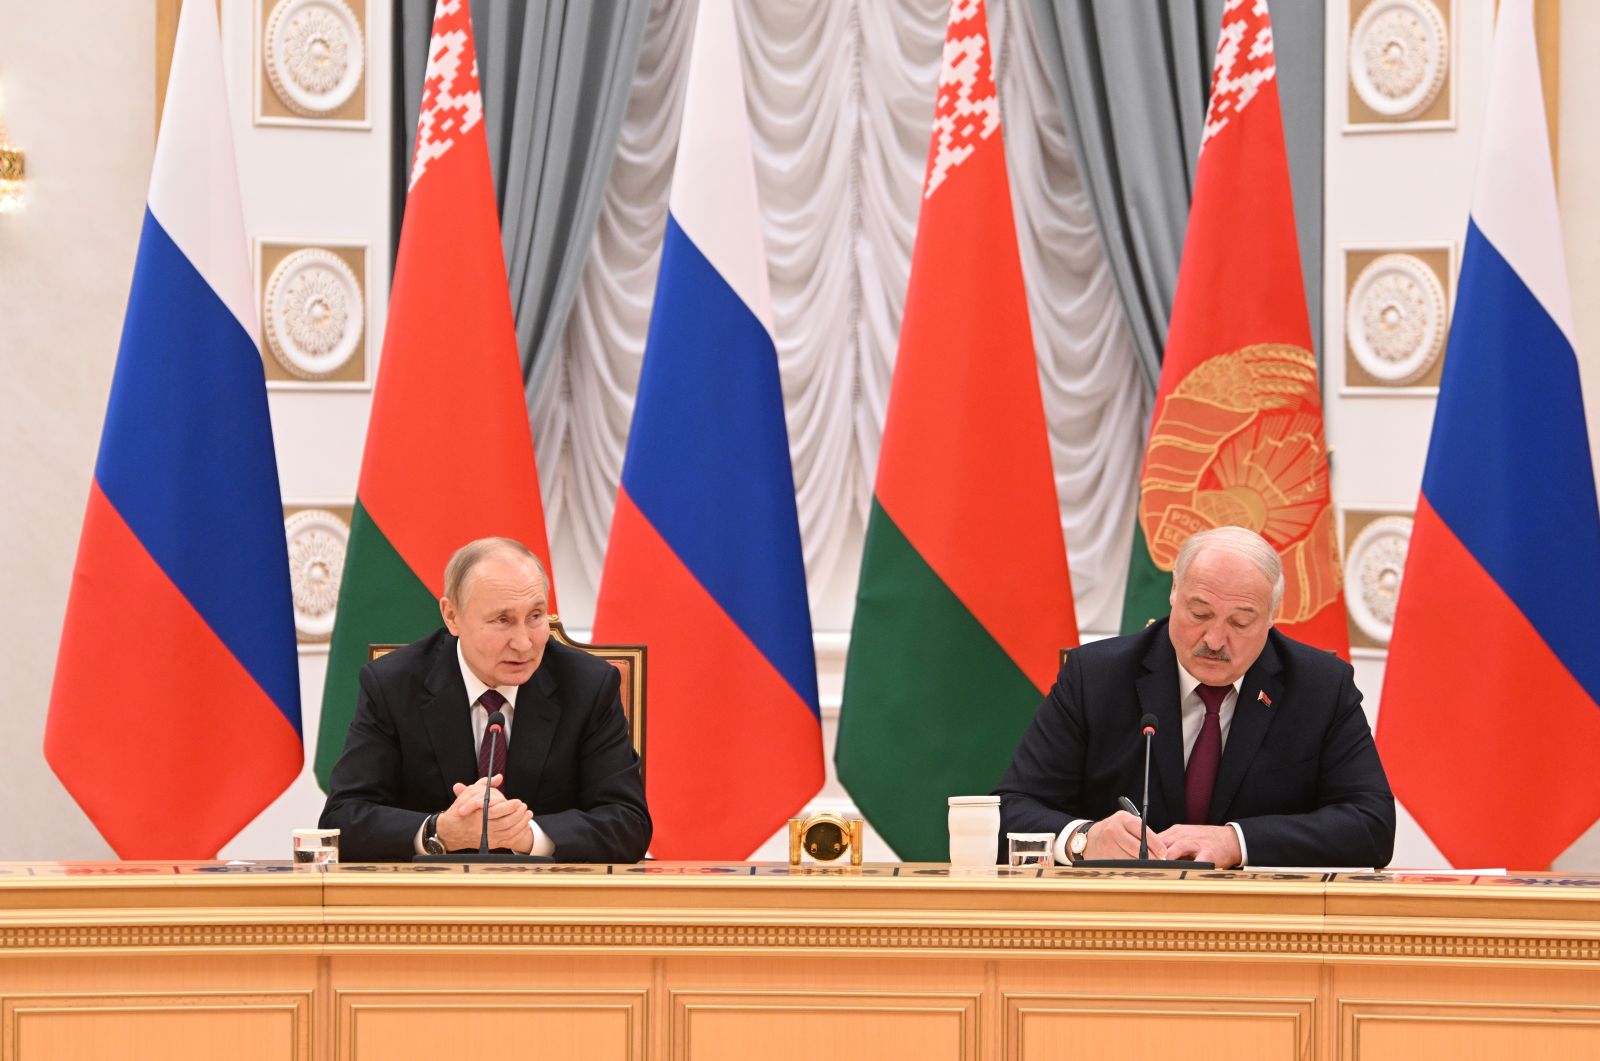 epa10373944 Russian President Vladimir Putin (L) and Belarusian President Alexander Lukashenko attend a meeting in expanded format at the Palace of Independence in Minsk, Belarus, 19 December 2022. Vladimir Putin holds talks with his Belarusian counterpart and to discuss the issues of security in the region and joint measures to respond to challenges.  EPA/PAVEL BEDNYAKOV/SPUTNIK/KREMLIN POOL MANDATORY CREDIT